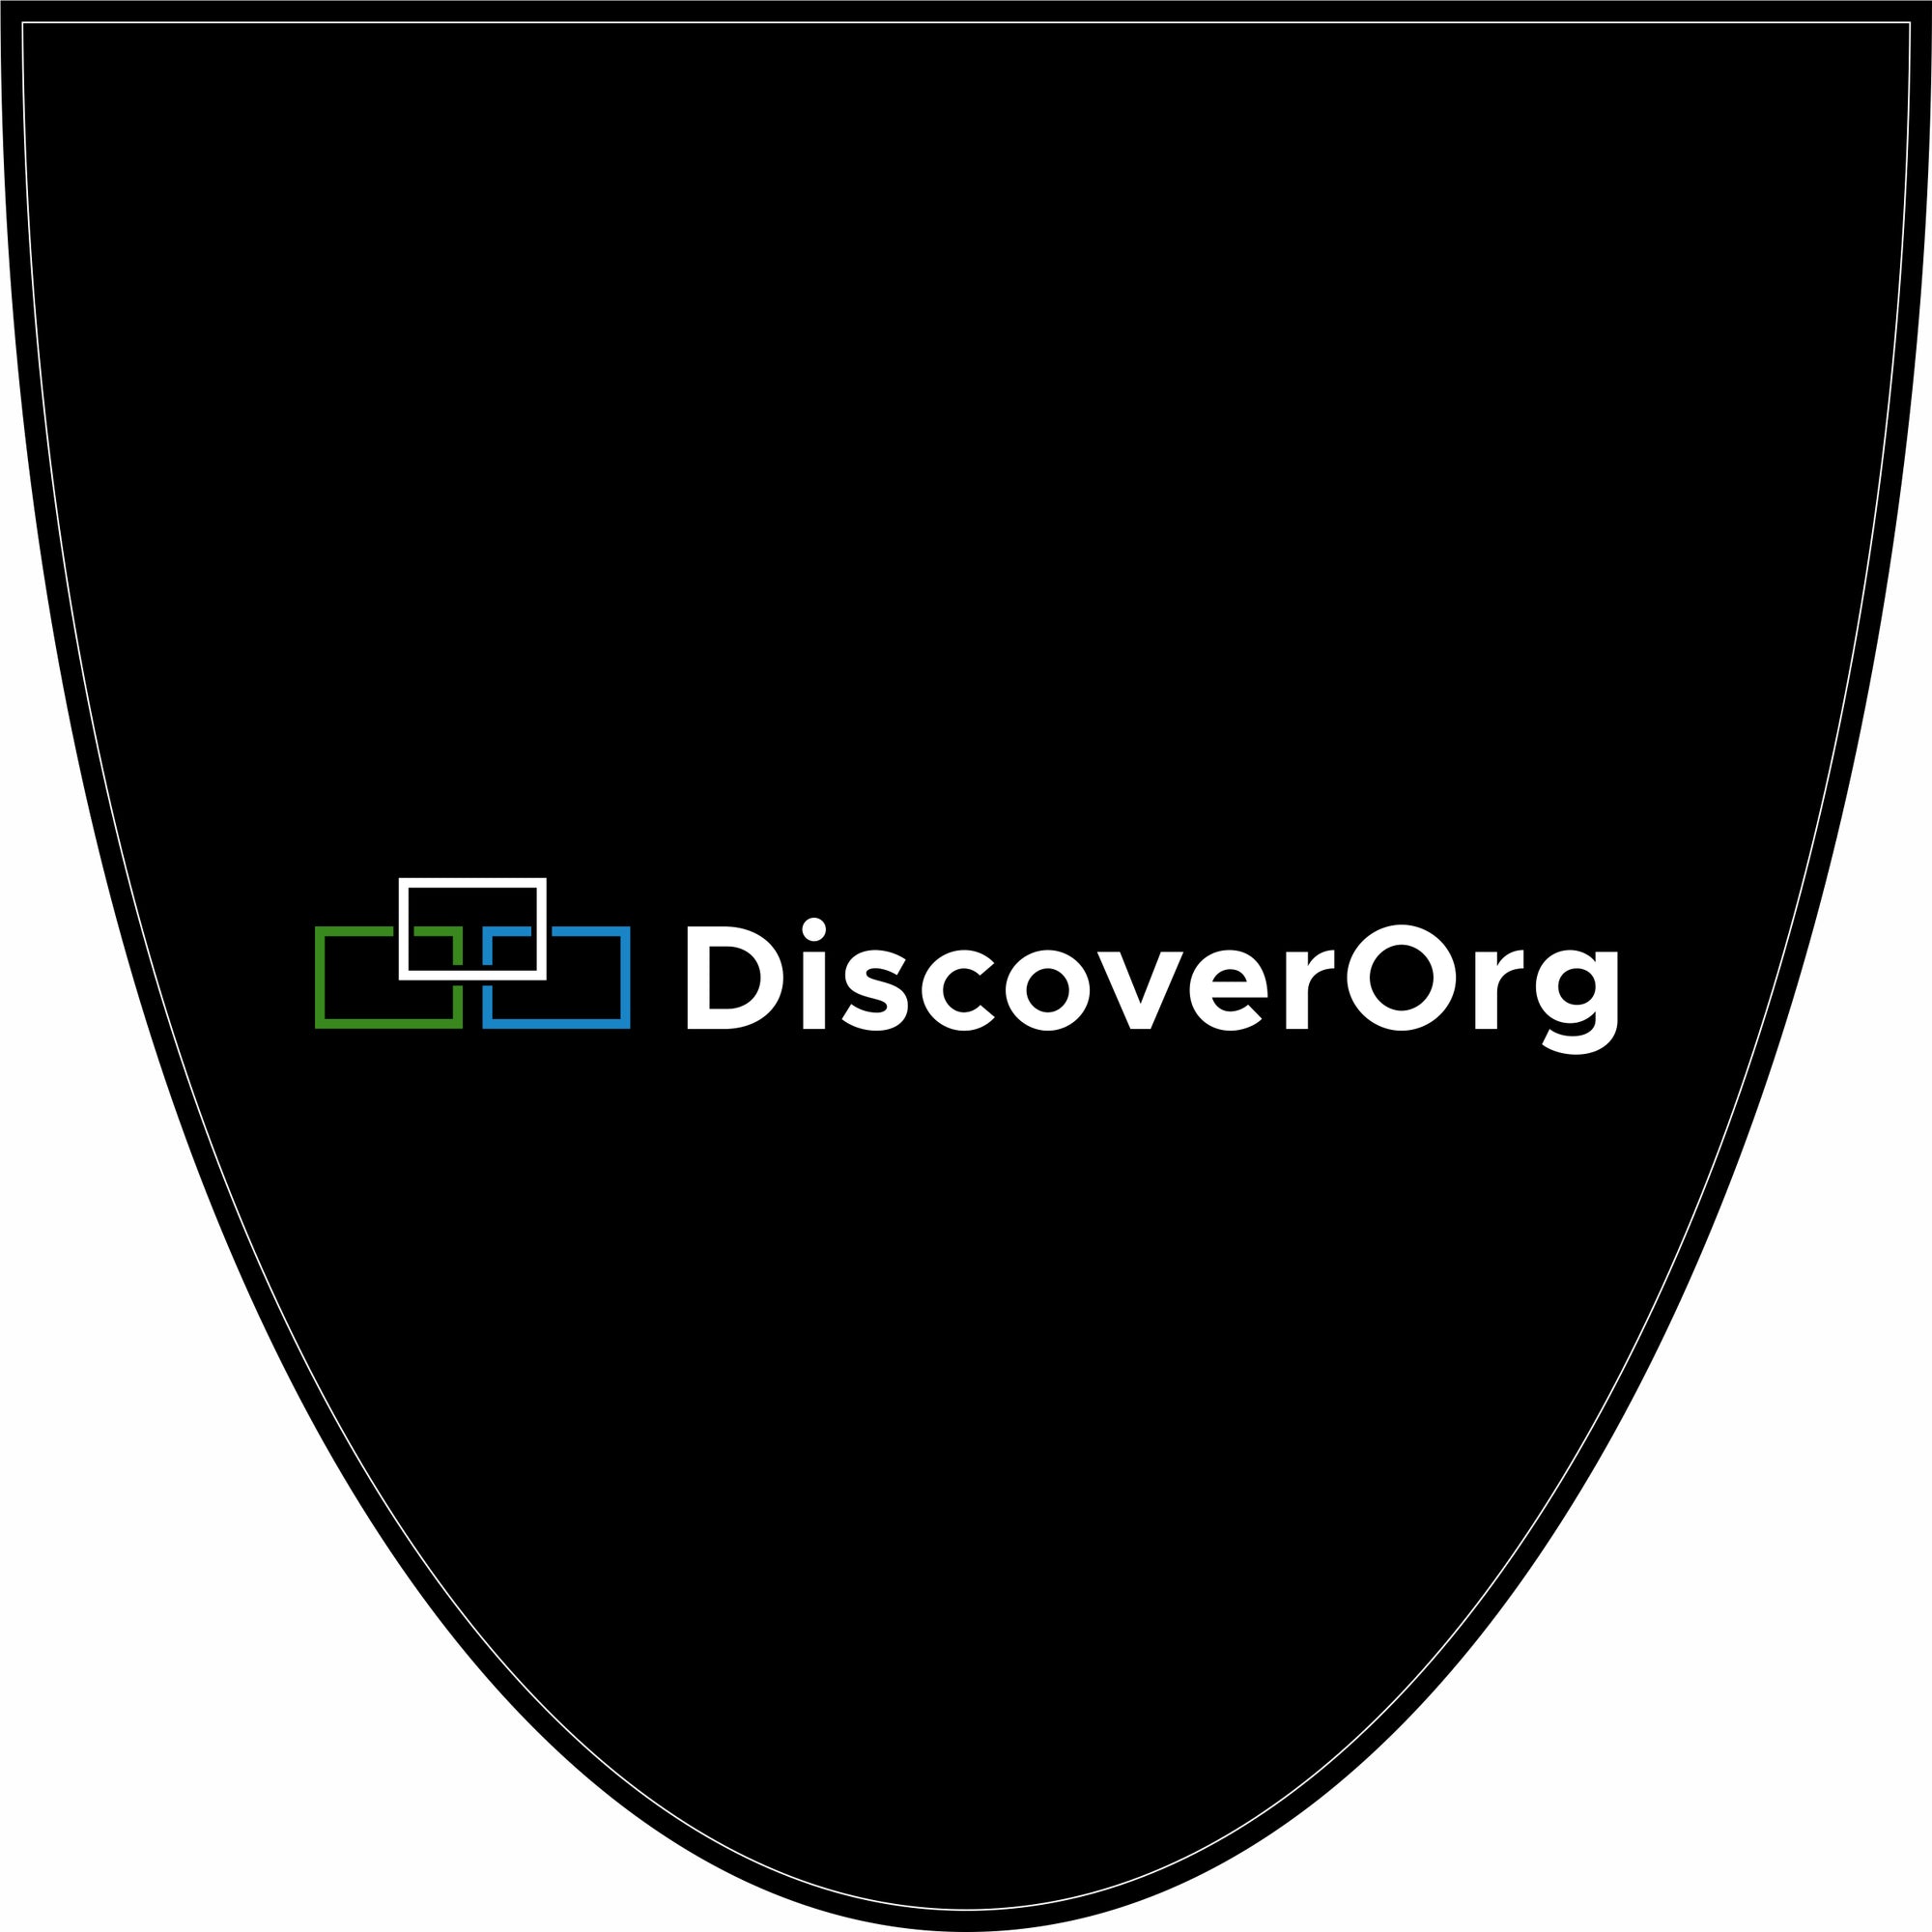 DiscoverOrg2 § 11 X 11 Luxury Berber Inlay - The Personalized Doormats Company